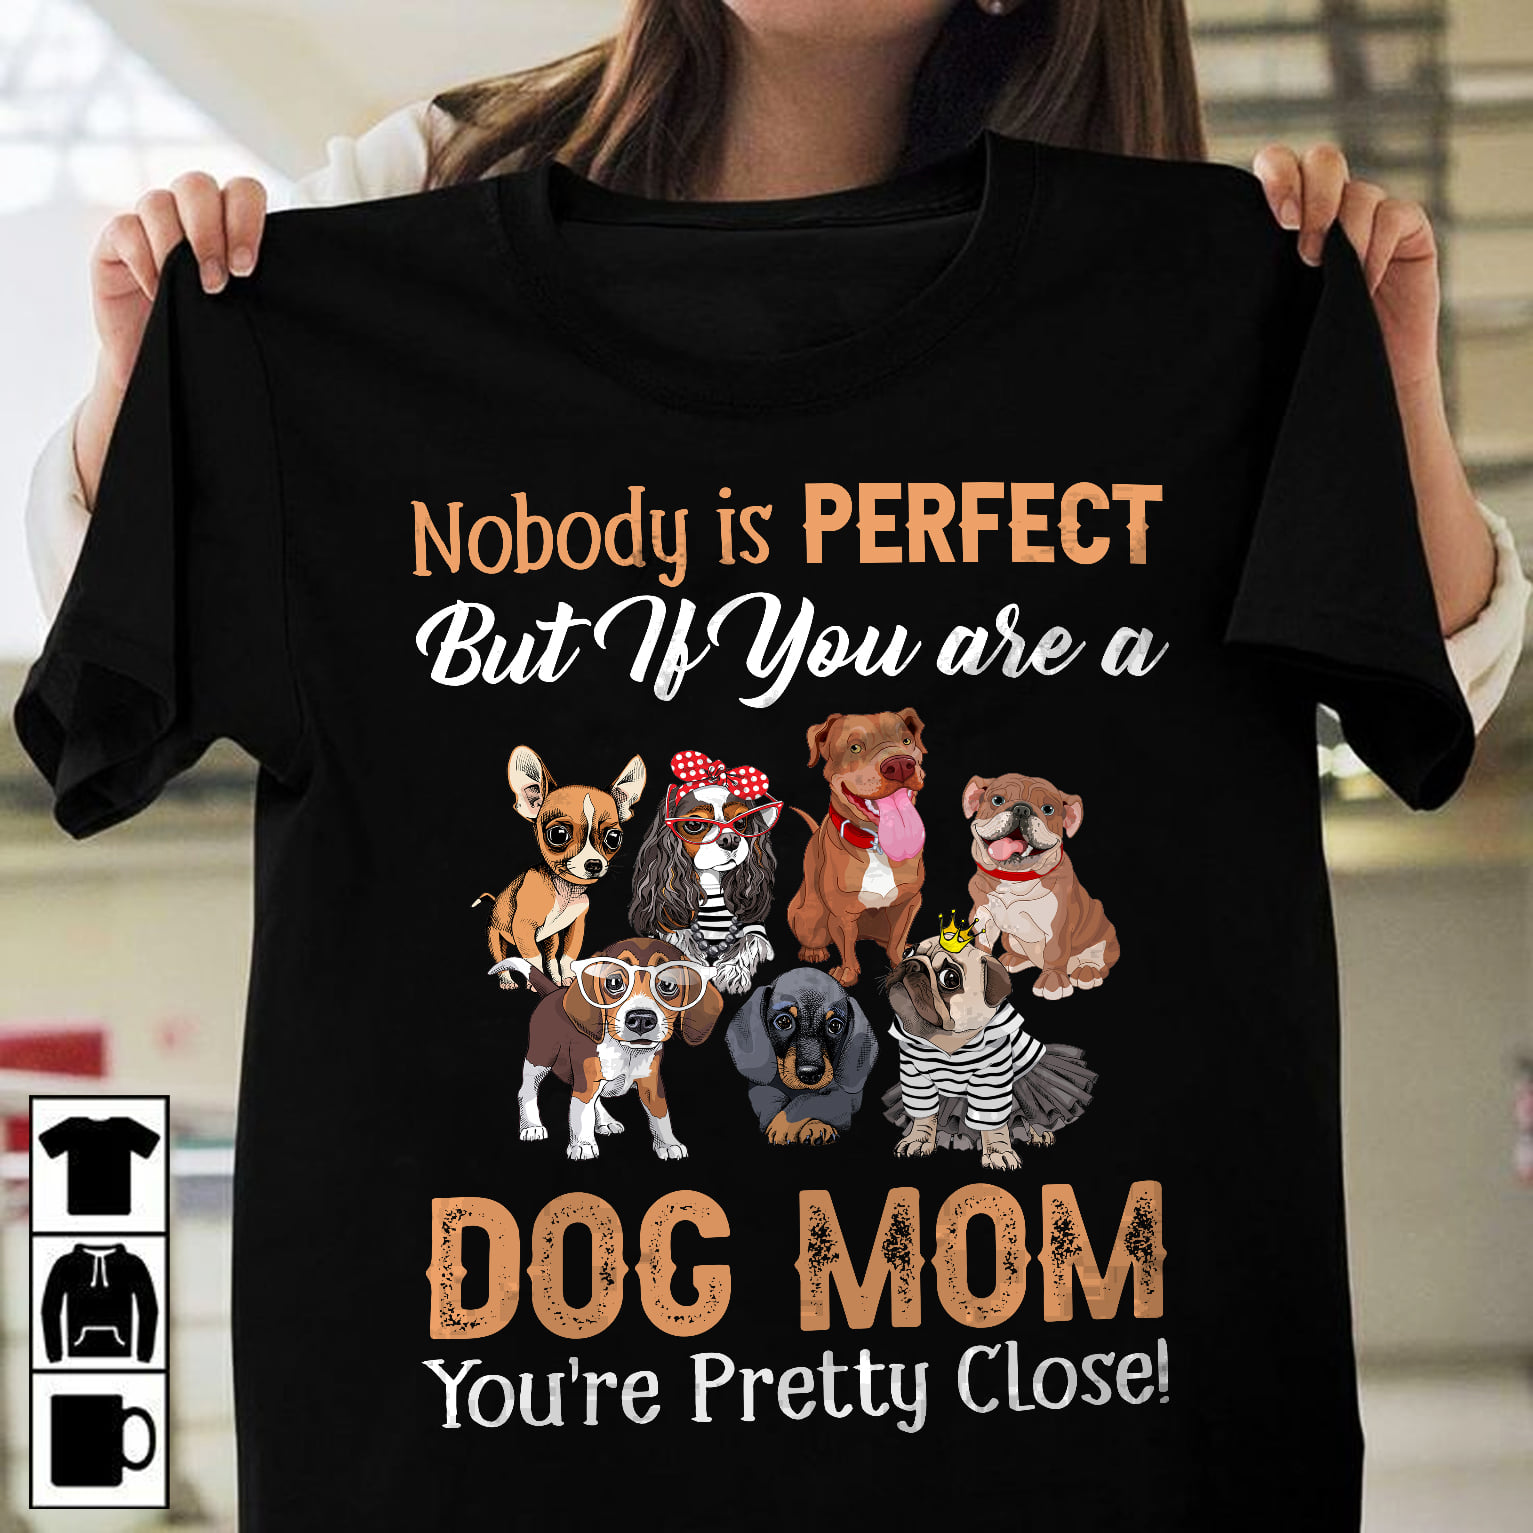 Nobody is perfect but if you are a dog mom you're pretty close